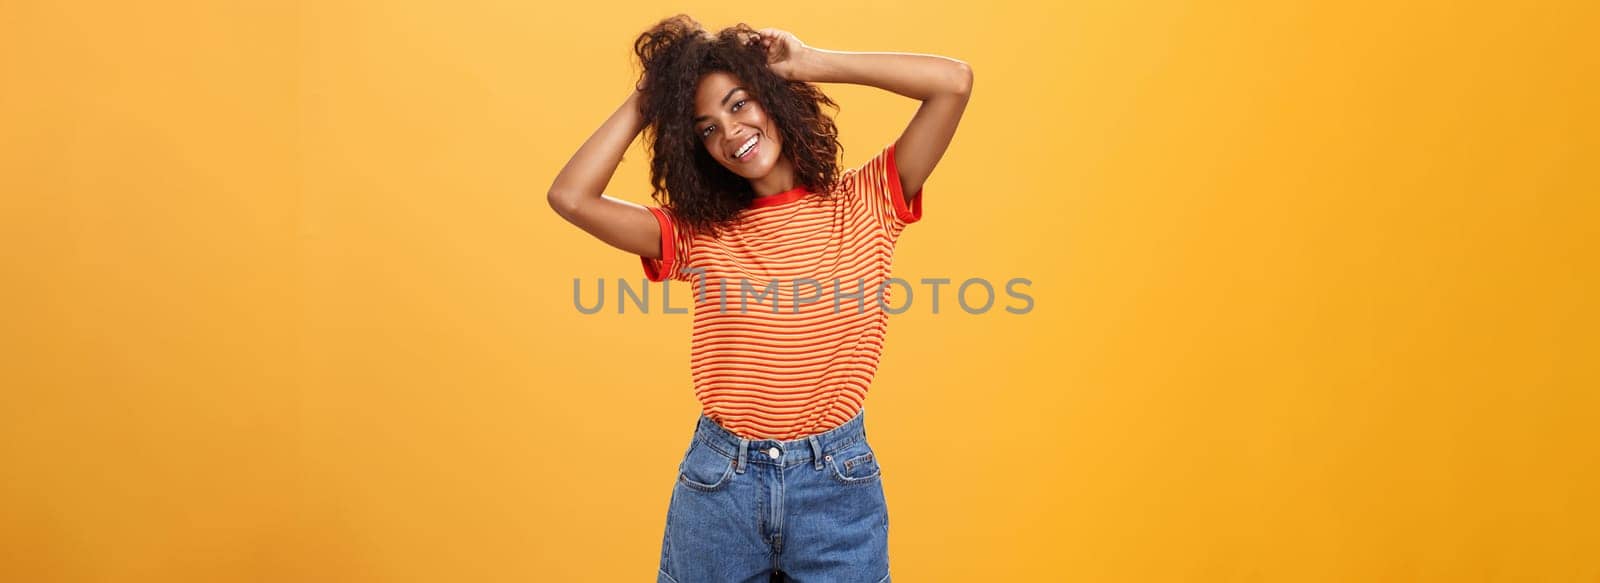 Time start living life fullest. Joyful optimistic woman having fun during vacation tilting head touching curly hair and enjoying summer sunshine in trendy striped t-shirt and shorts over orange wall.